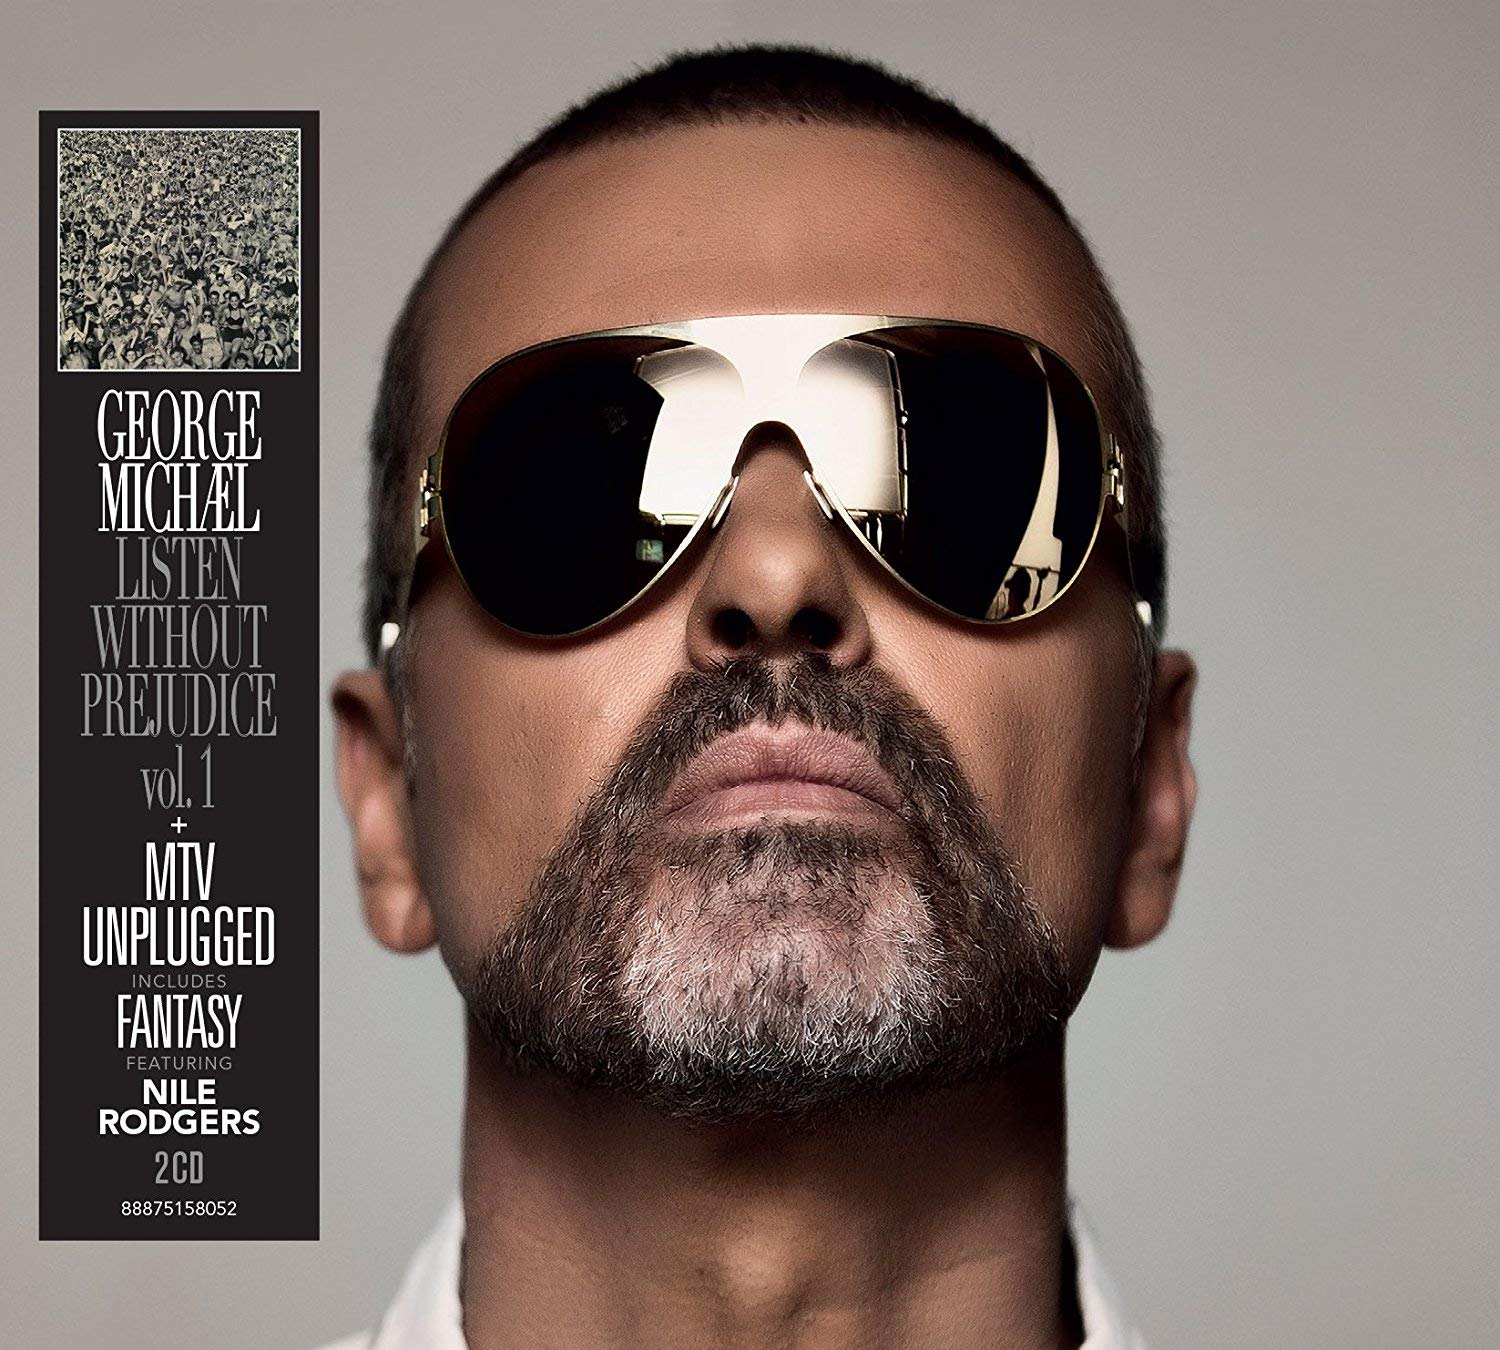 George Micheal -Listen Without Prejudice / MTV Unplugged